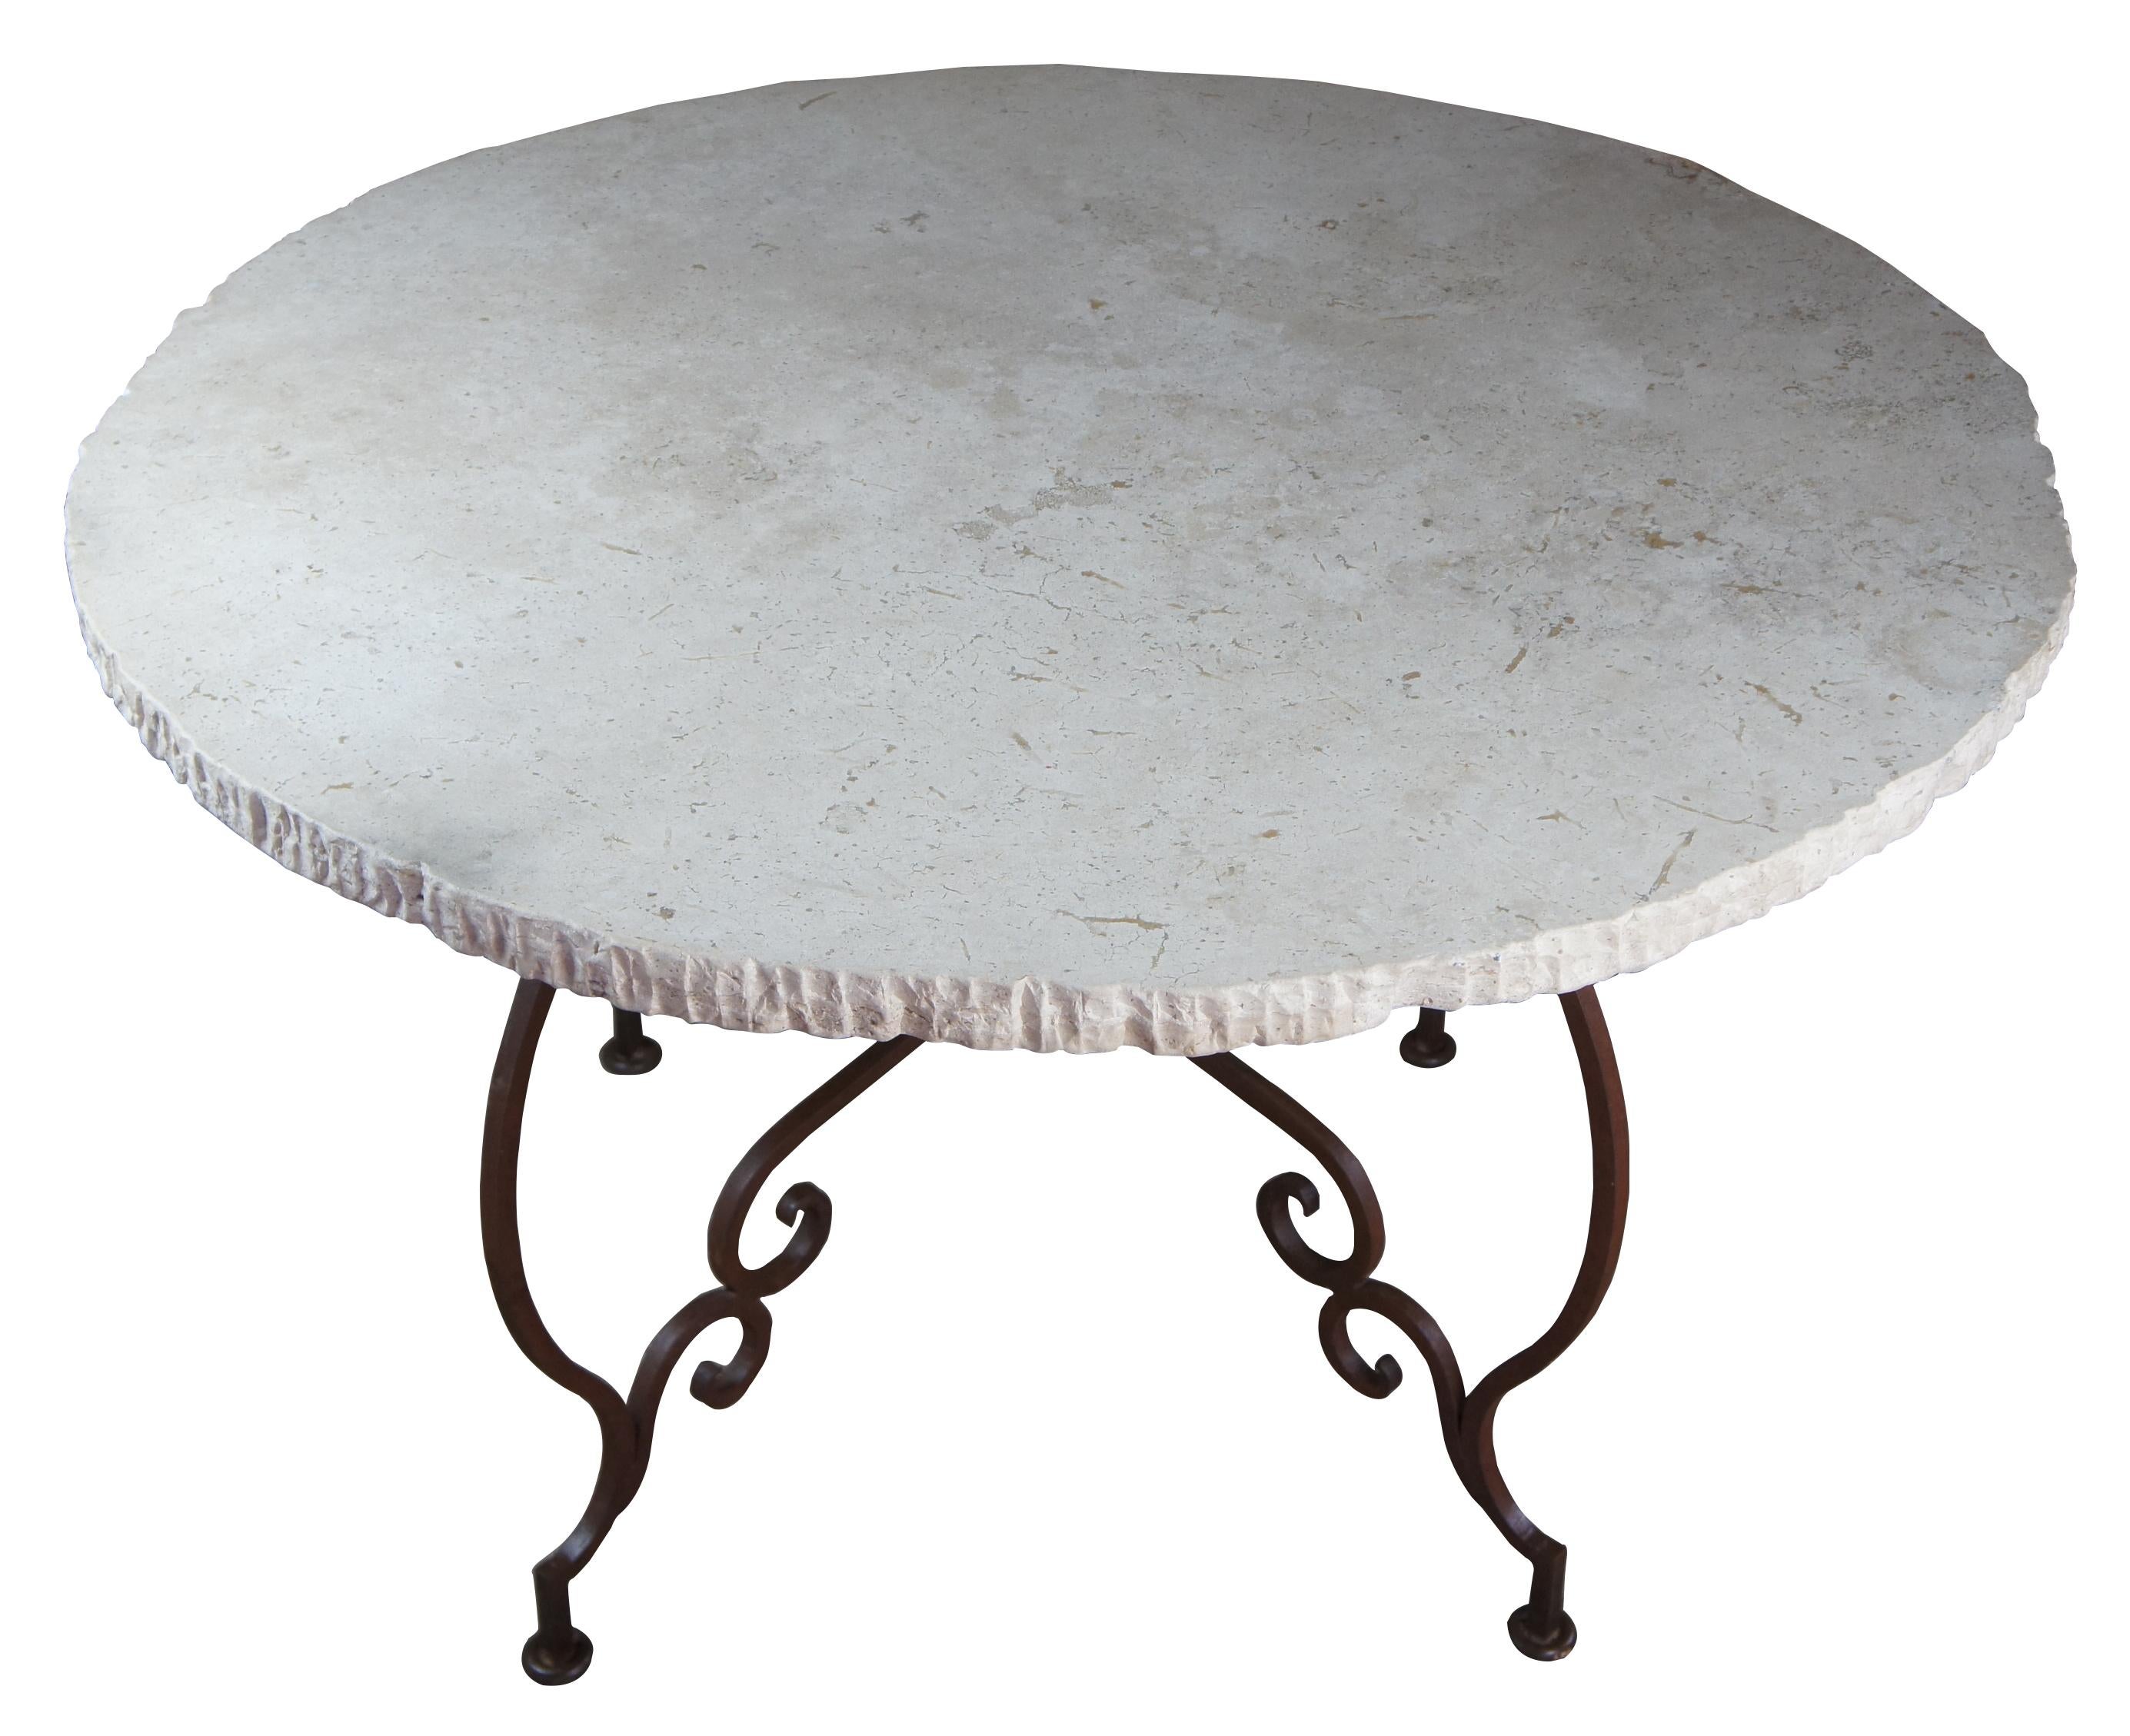 Tuscan style scrolled iron center table with stone top French entryway pedestal

French or Tuscan inspired center or dining / breakfast table. Features a scrolled iron base and round stone top with round scalloped edge.